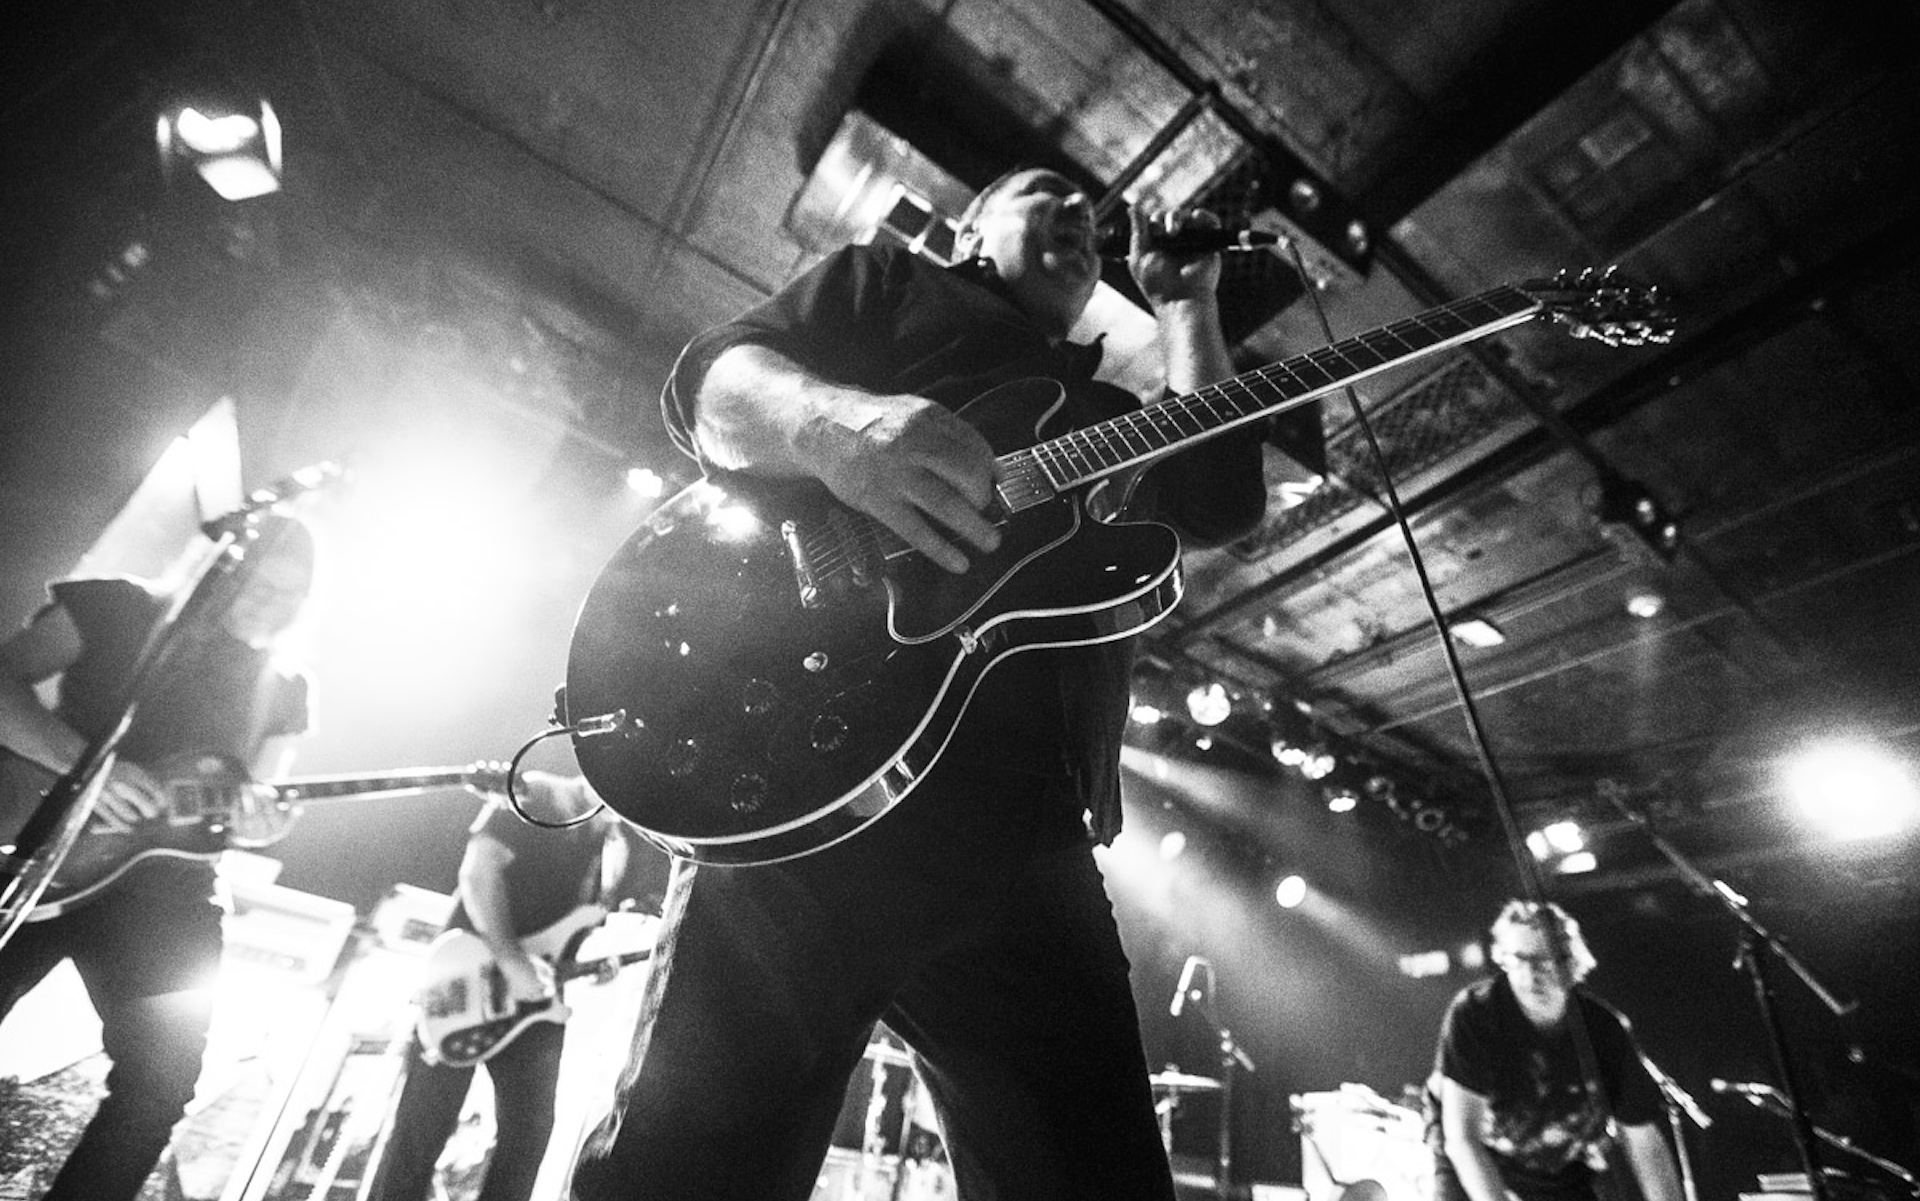 photo-gallery-the-afghan-whigs-and-har-mar-superstar-live-at-the